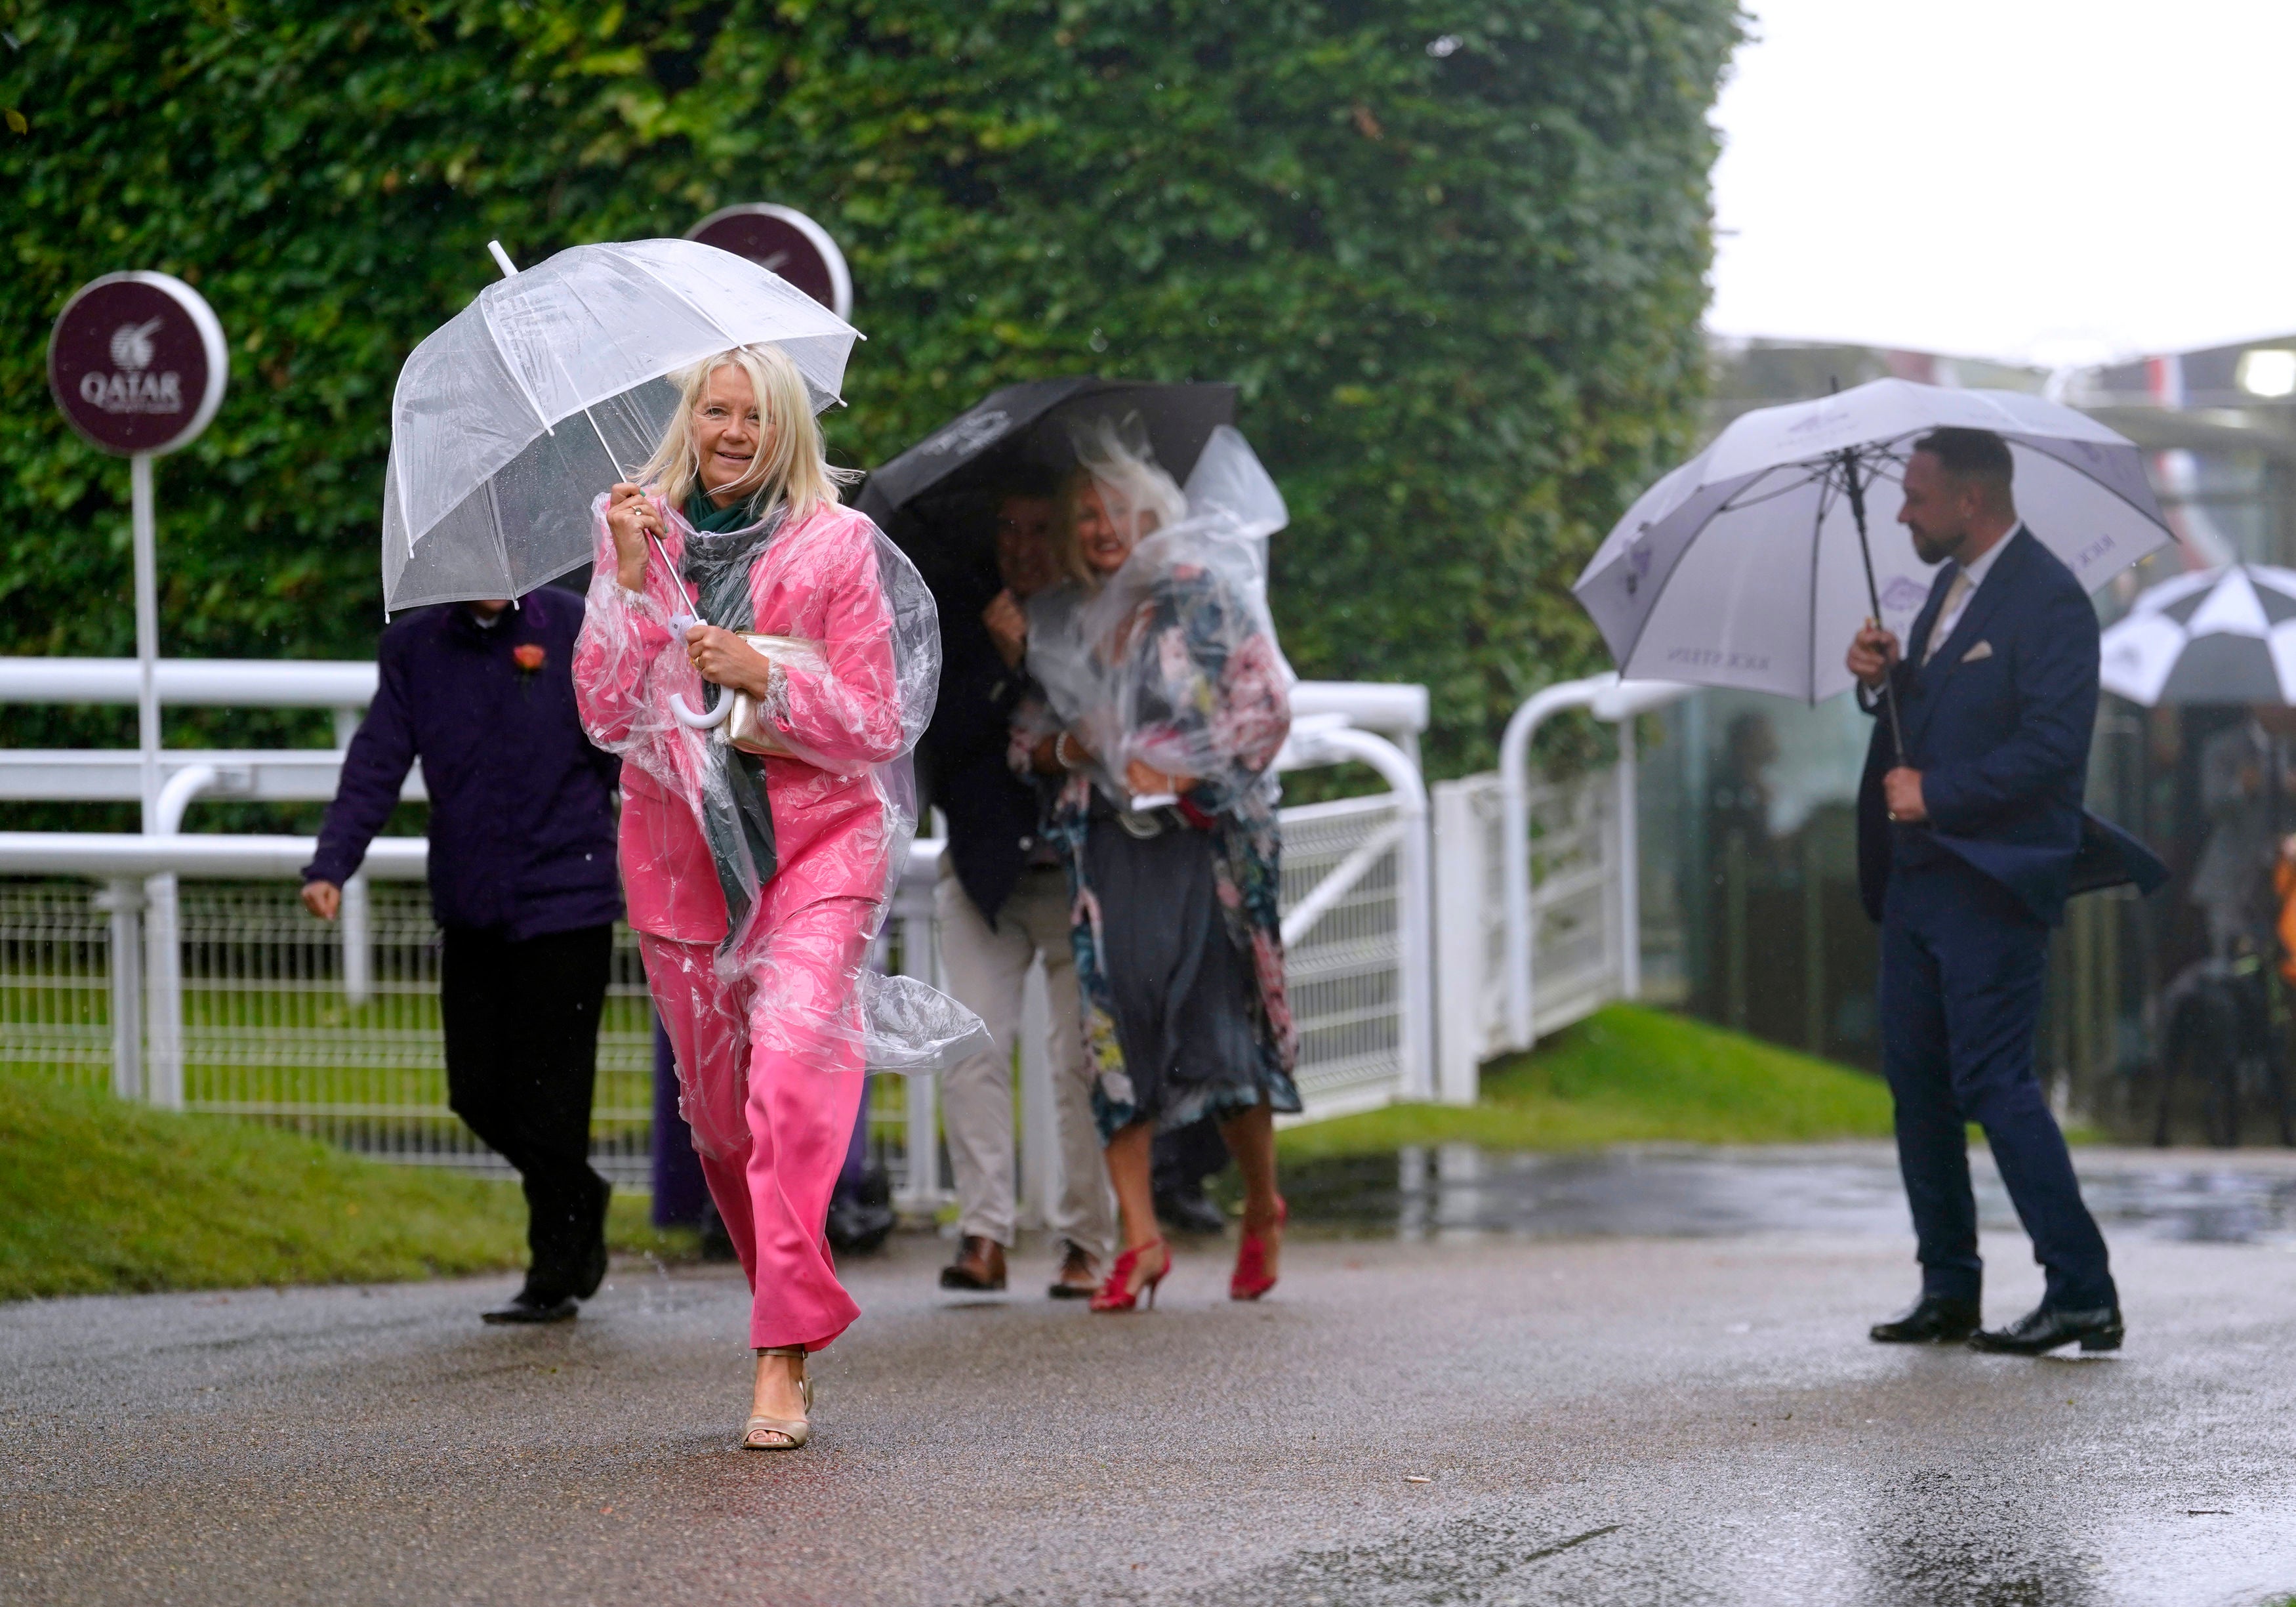 Racegoers shelter from the rain as they arrive for day five of the Qatar Goodwood Festival at Goodwood Racecourse